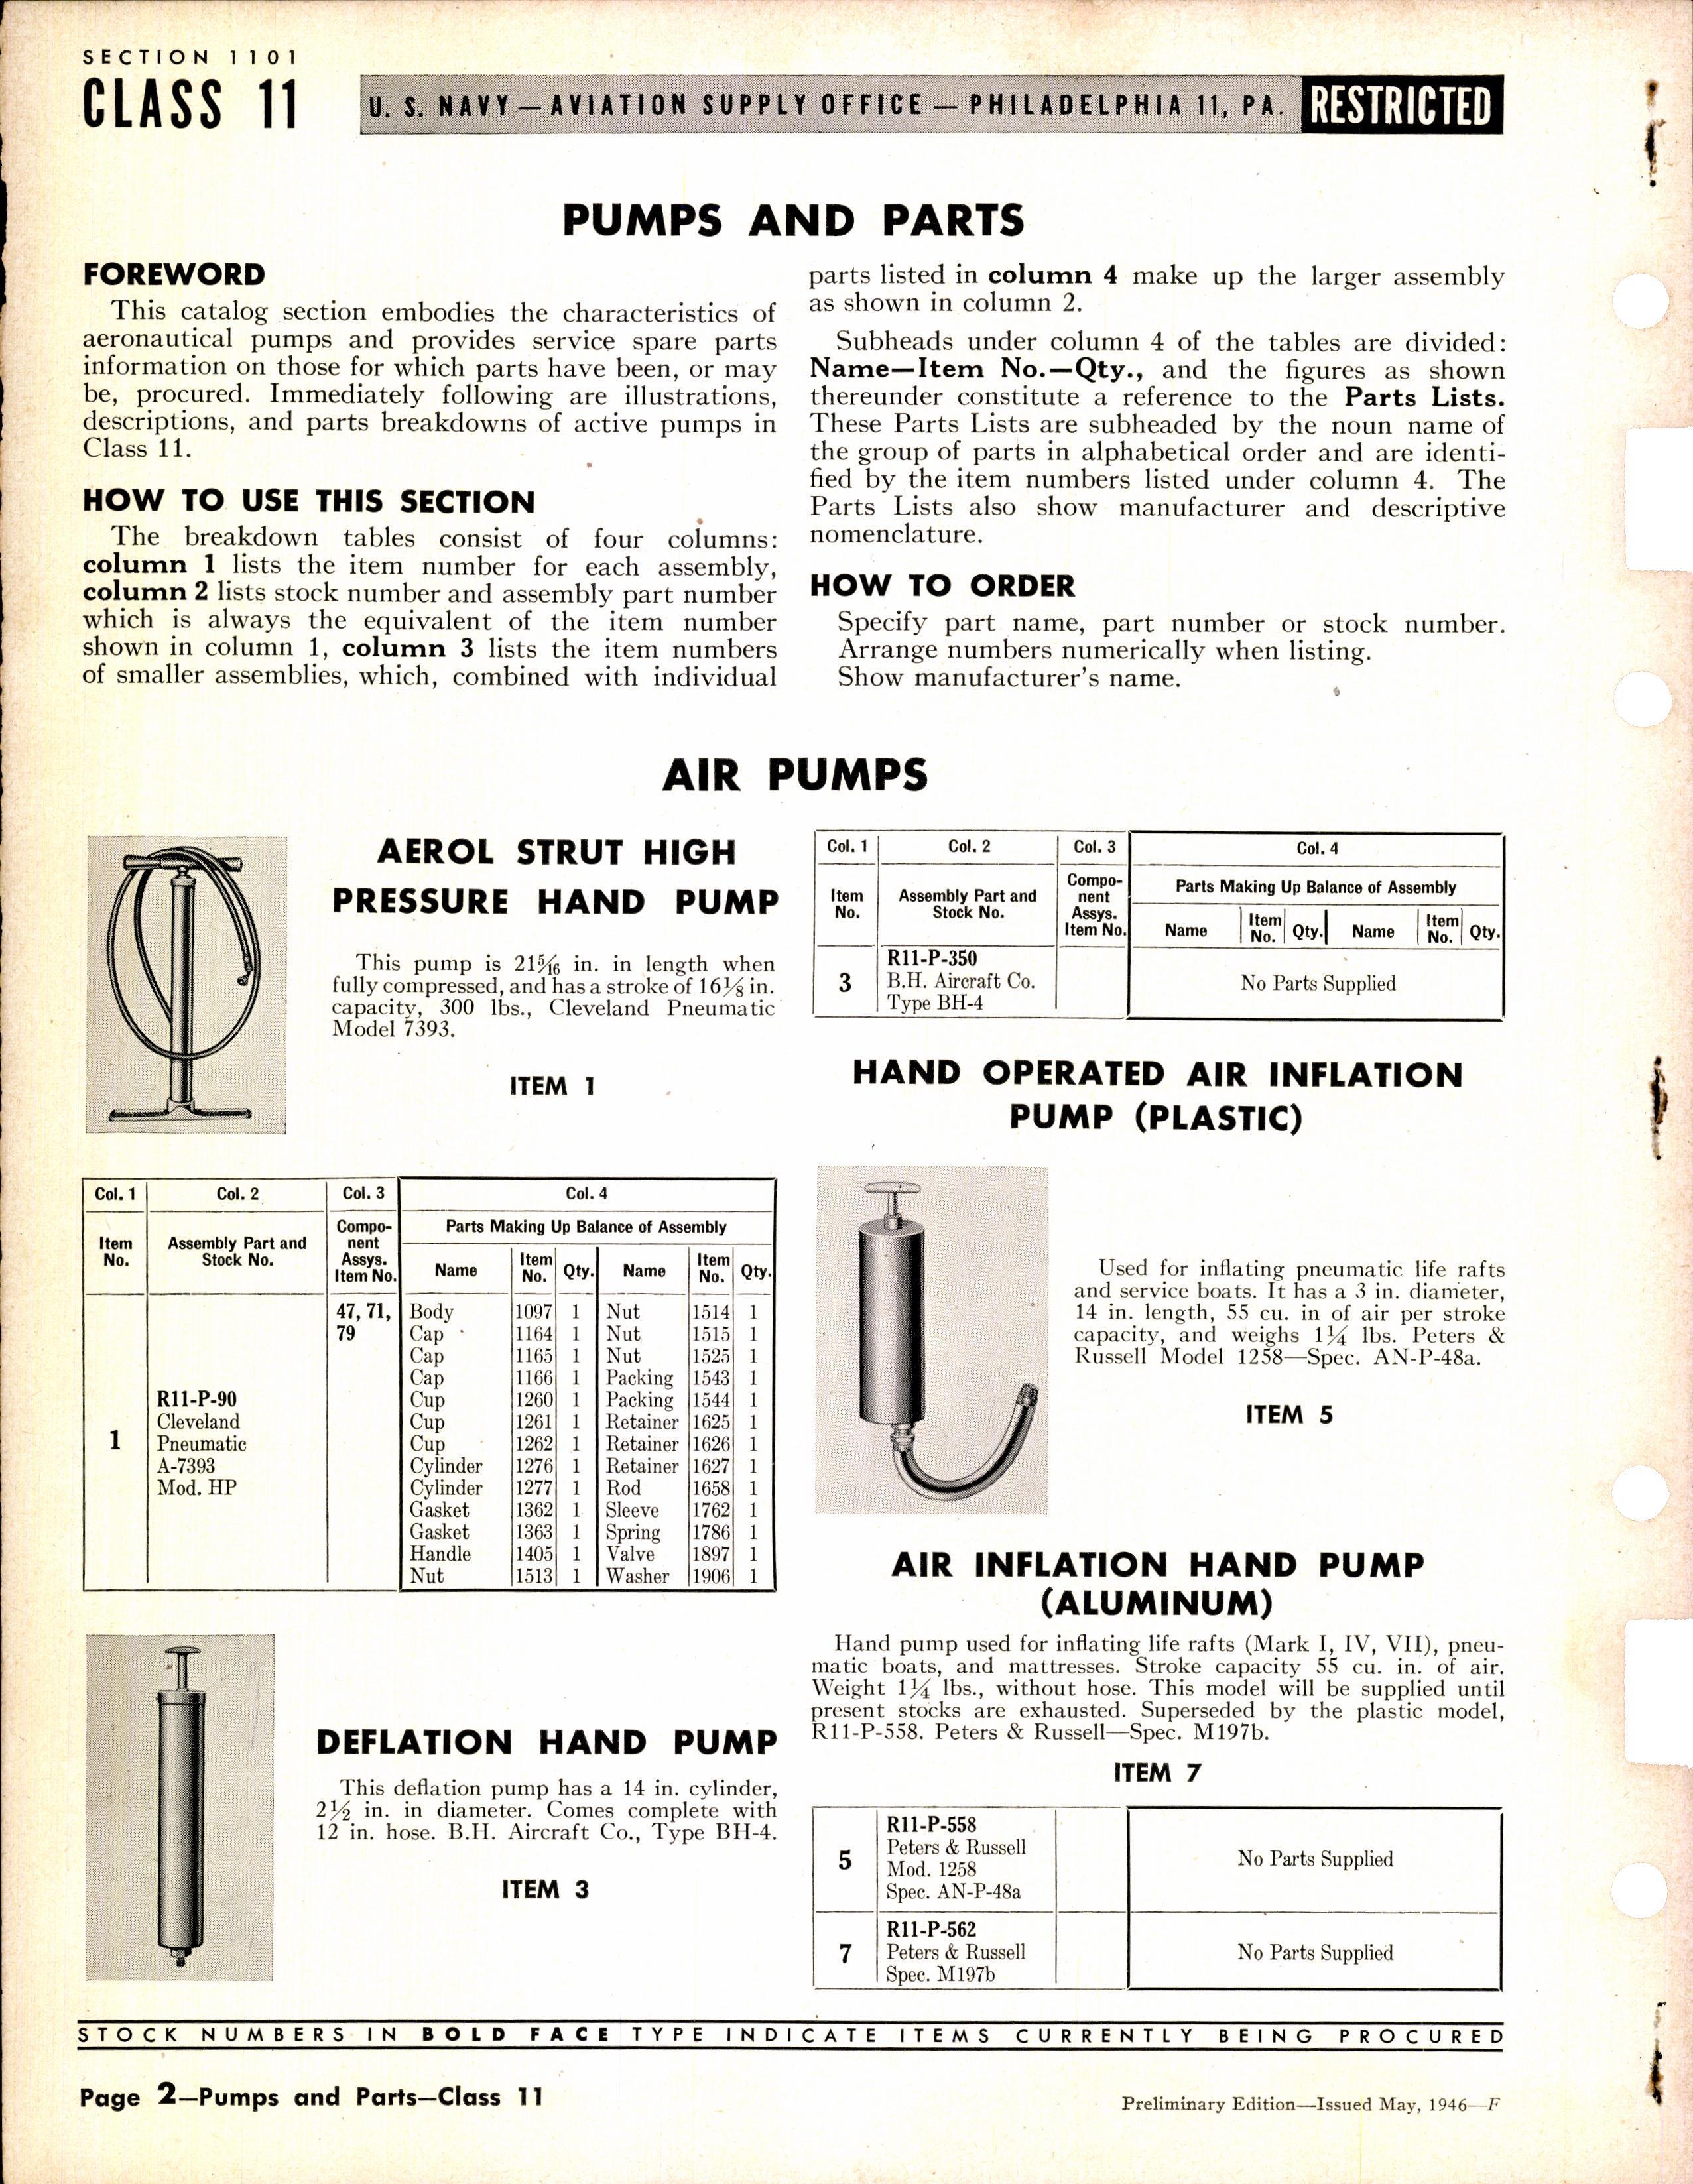 Sample page 2 from AirCorps Library document: Pumps and Parts